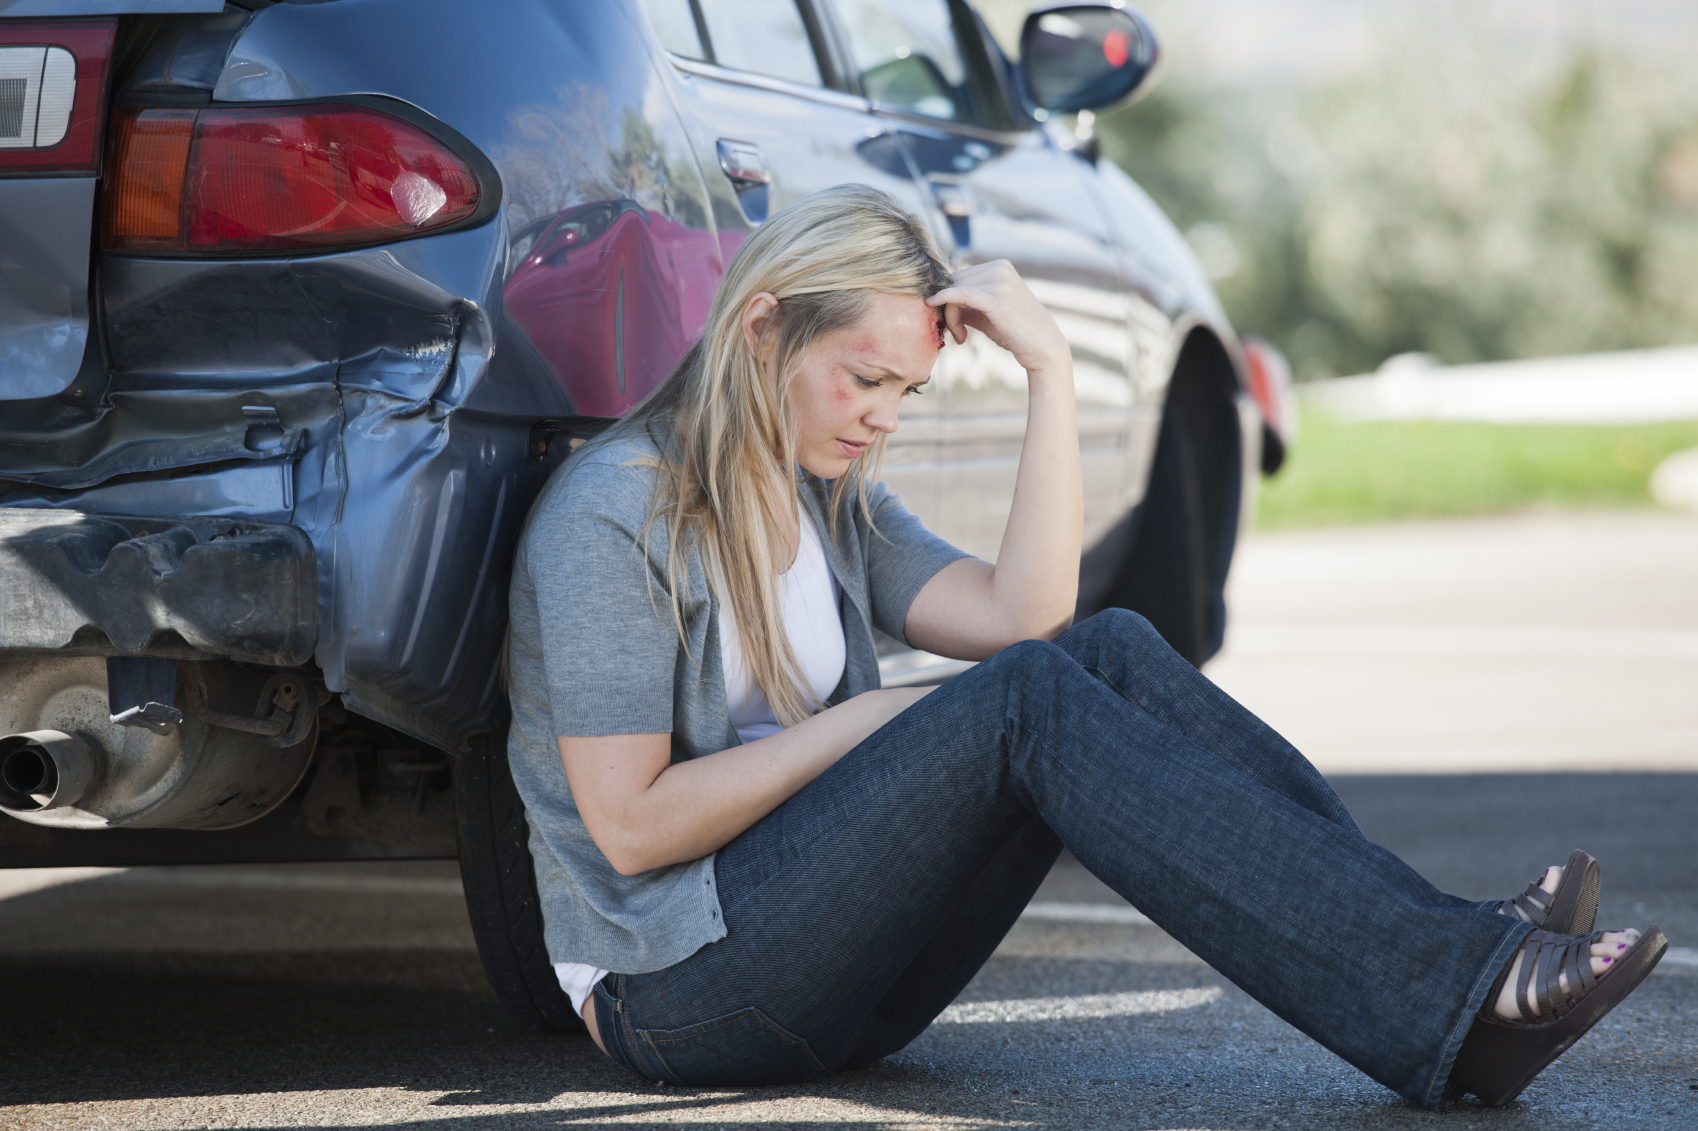 How To Deal With A Personal Injury